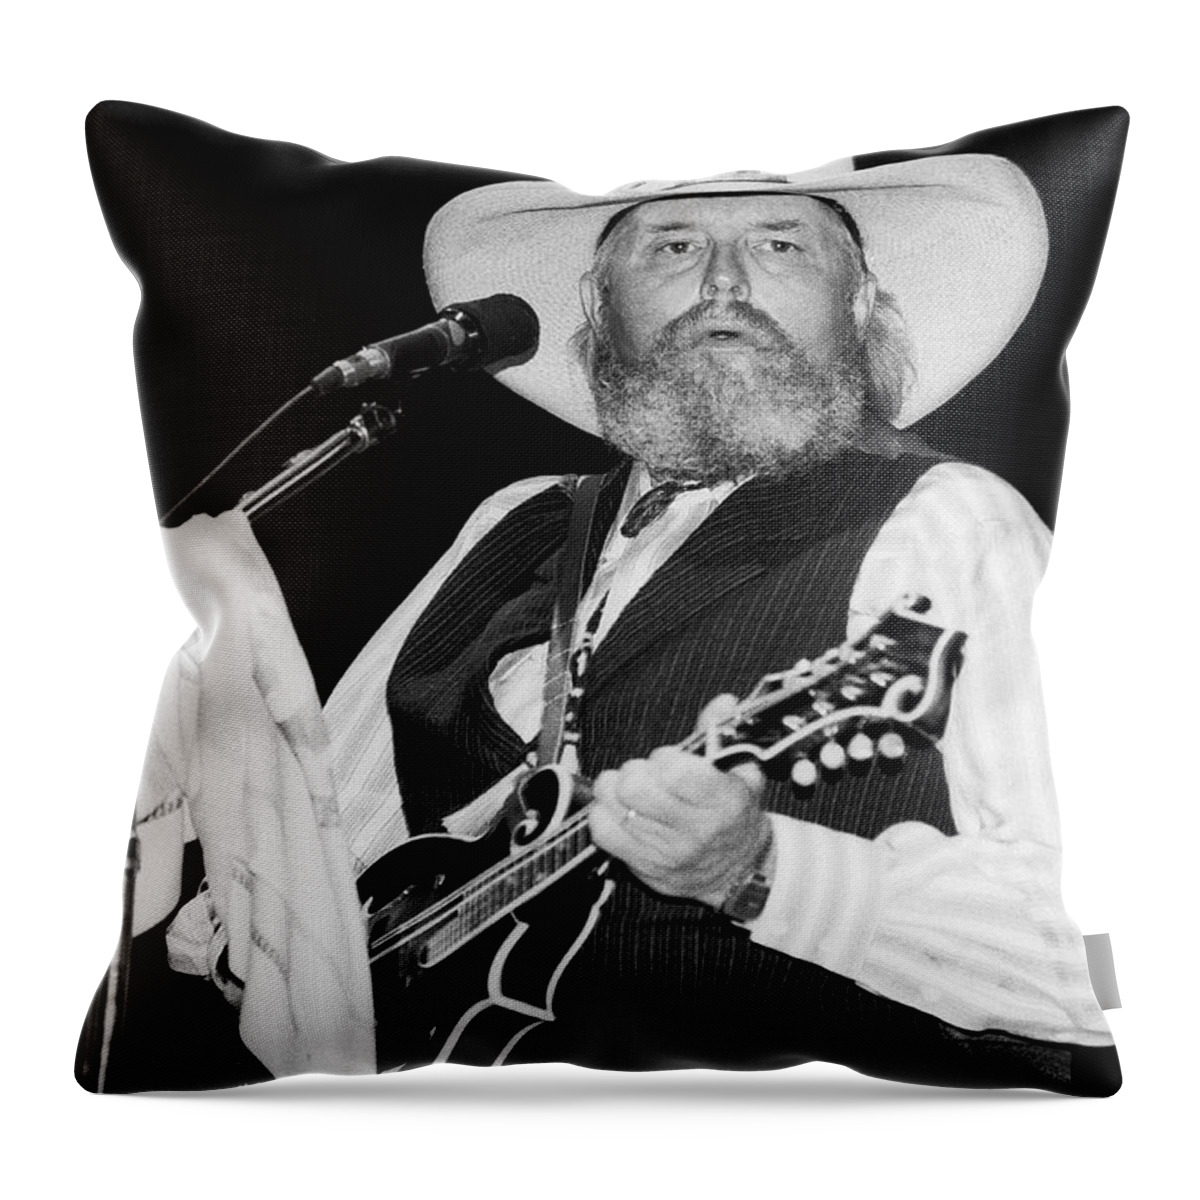 Singer Throw Pillow featuring the photograph Charlie Daniels #12 by Concert Photos